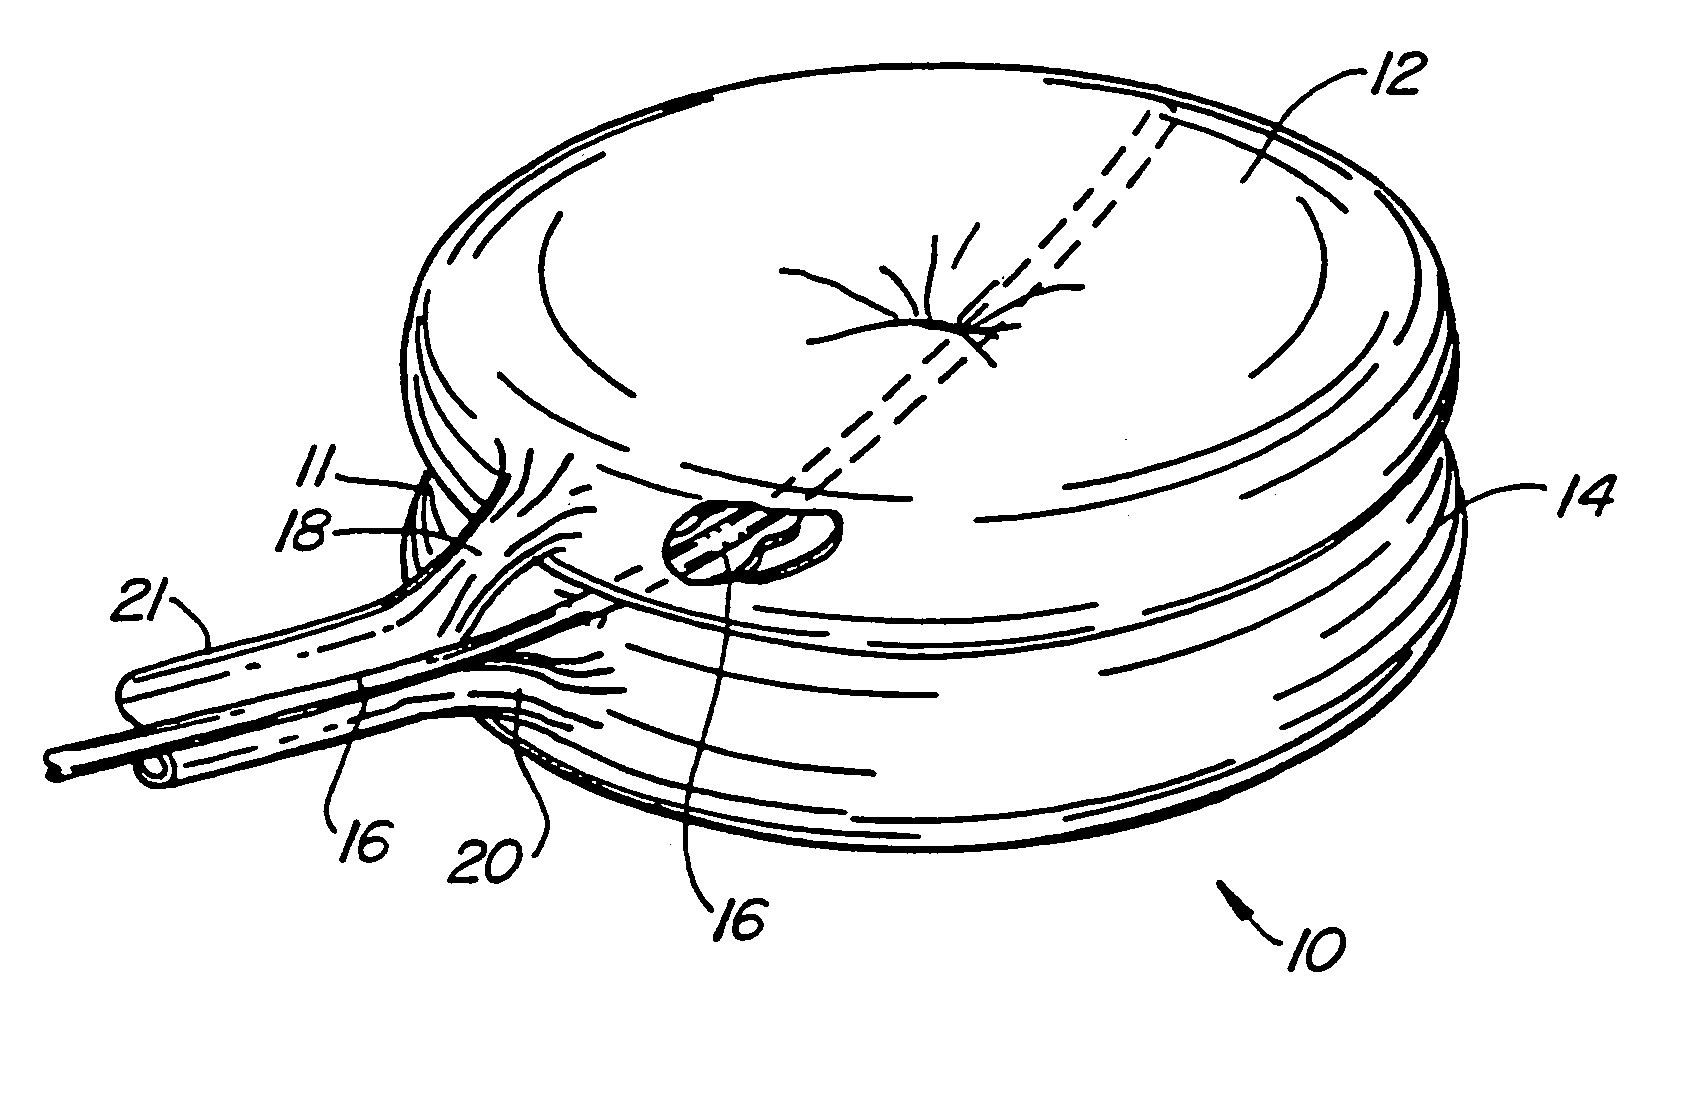 Devices and methods using an expandable body with internal restraint for compressing cancellous bone